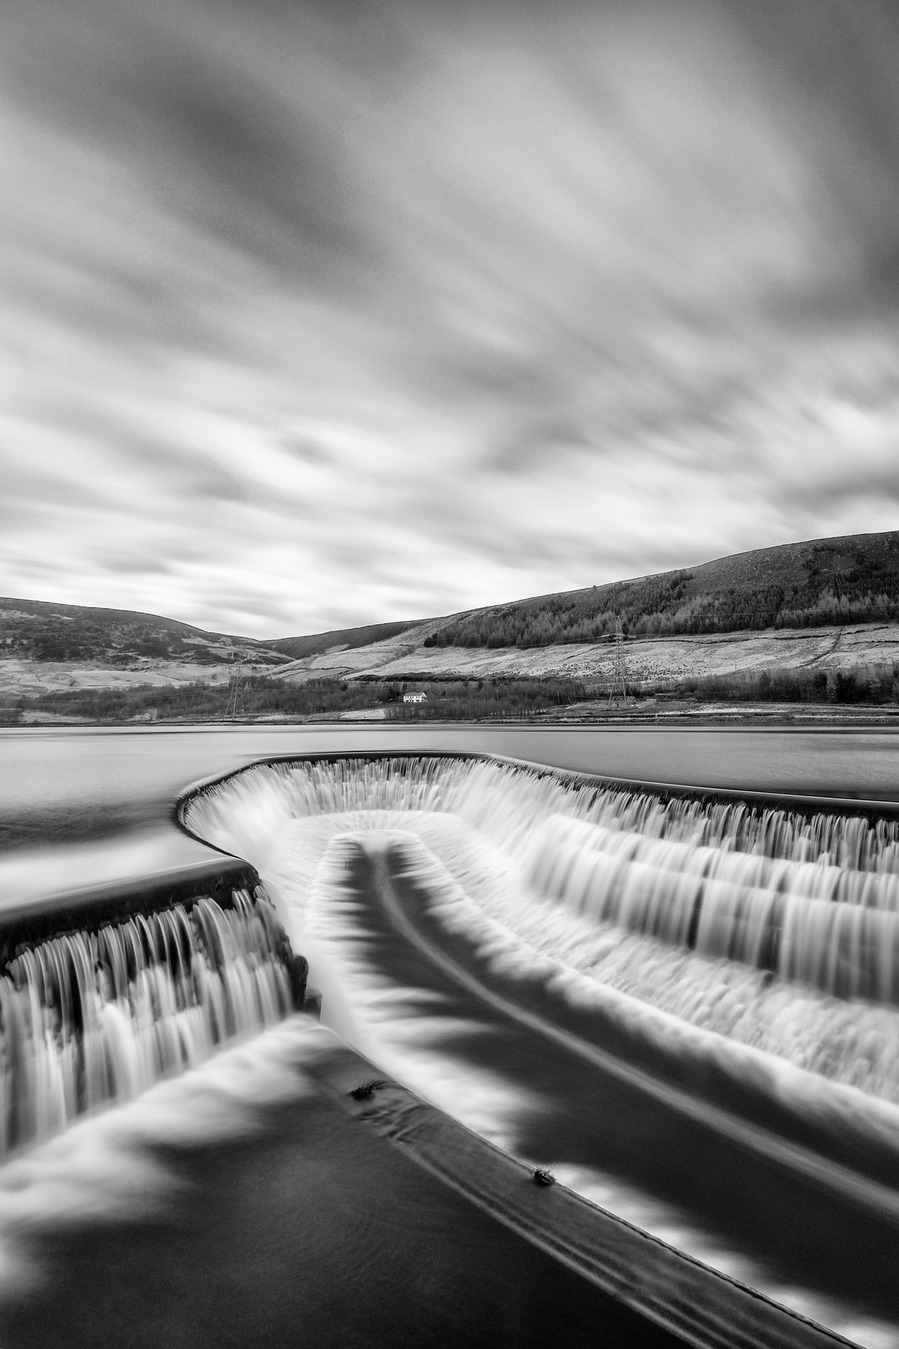 Torside reservoir in the North of the peak district with water cascading over the edge of the waterway with clouds moving in the distance due to a long exposure